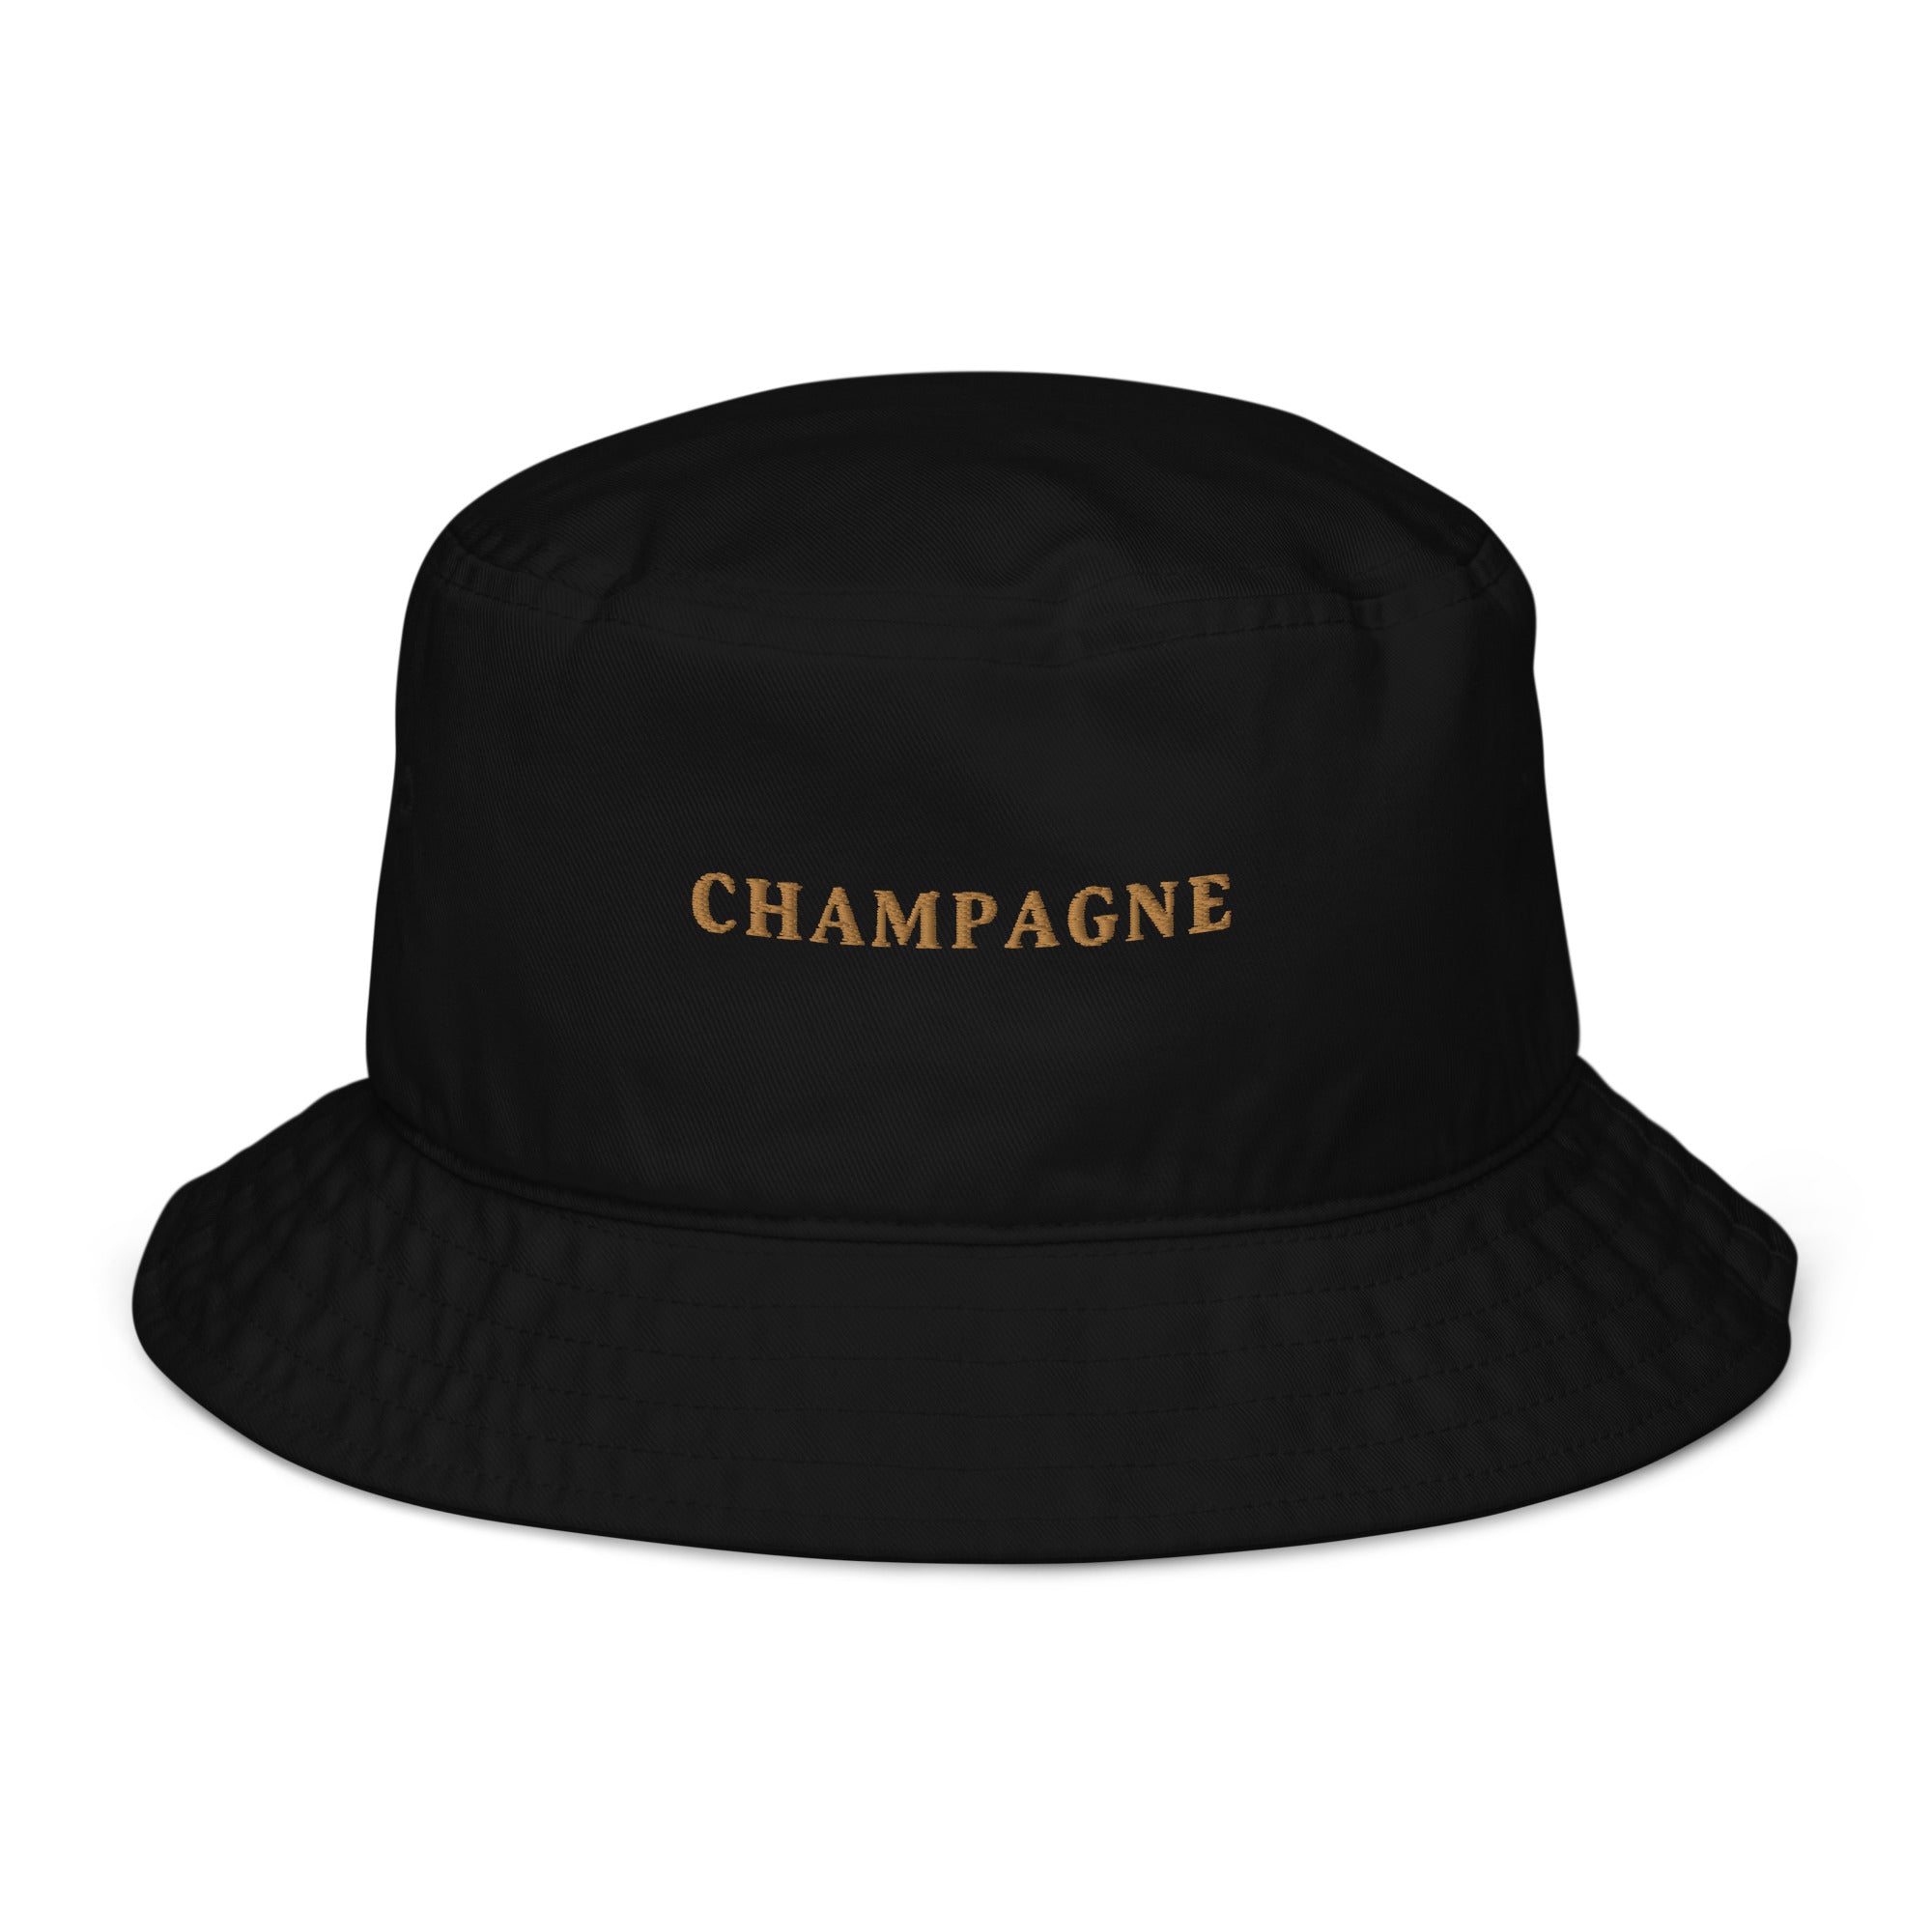 Champagne - Organic Embroidered Bucket Hat - The Refined Spirit